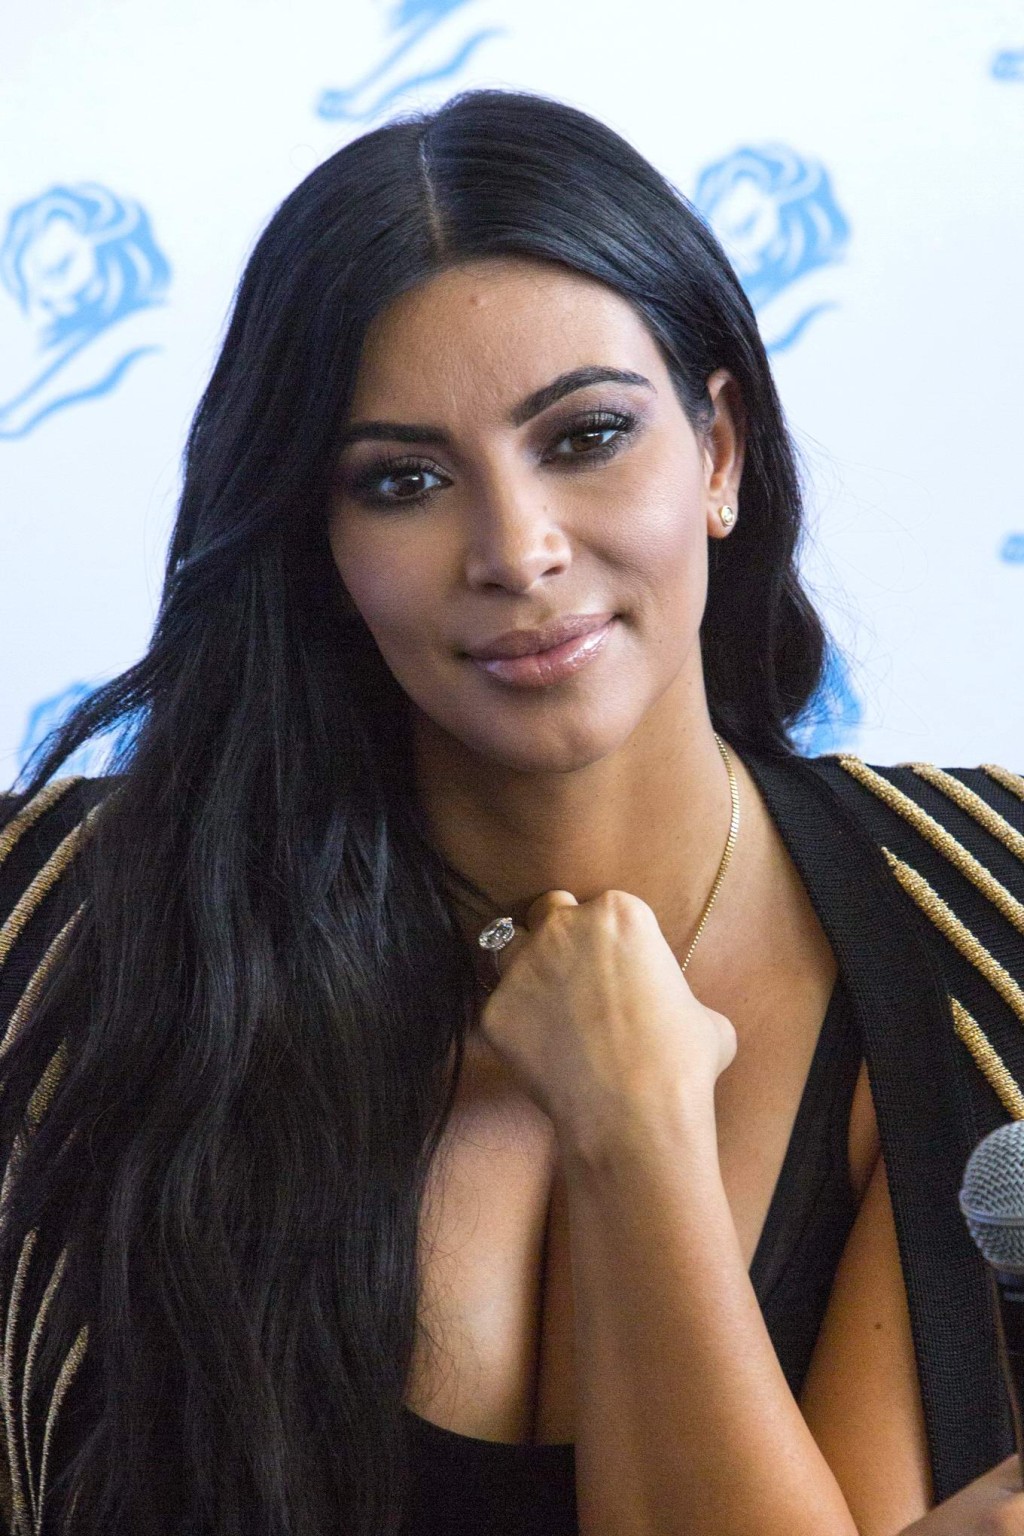 Kim Kardashian showing huge cleavage at the Cannes Lions event #75160364